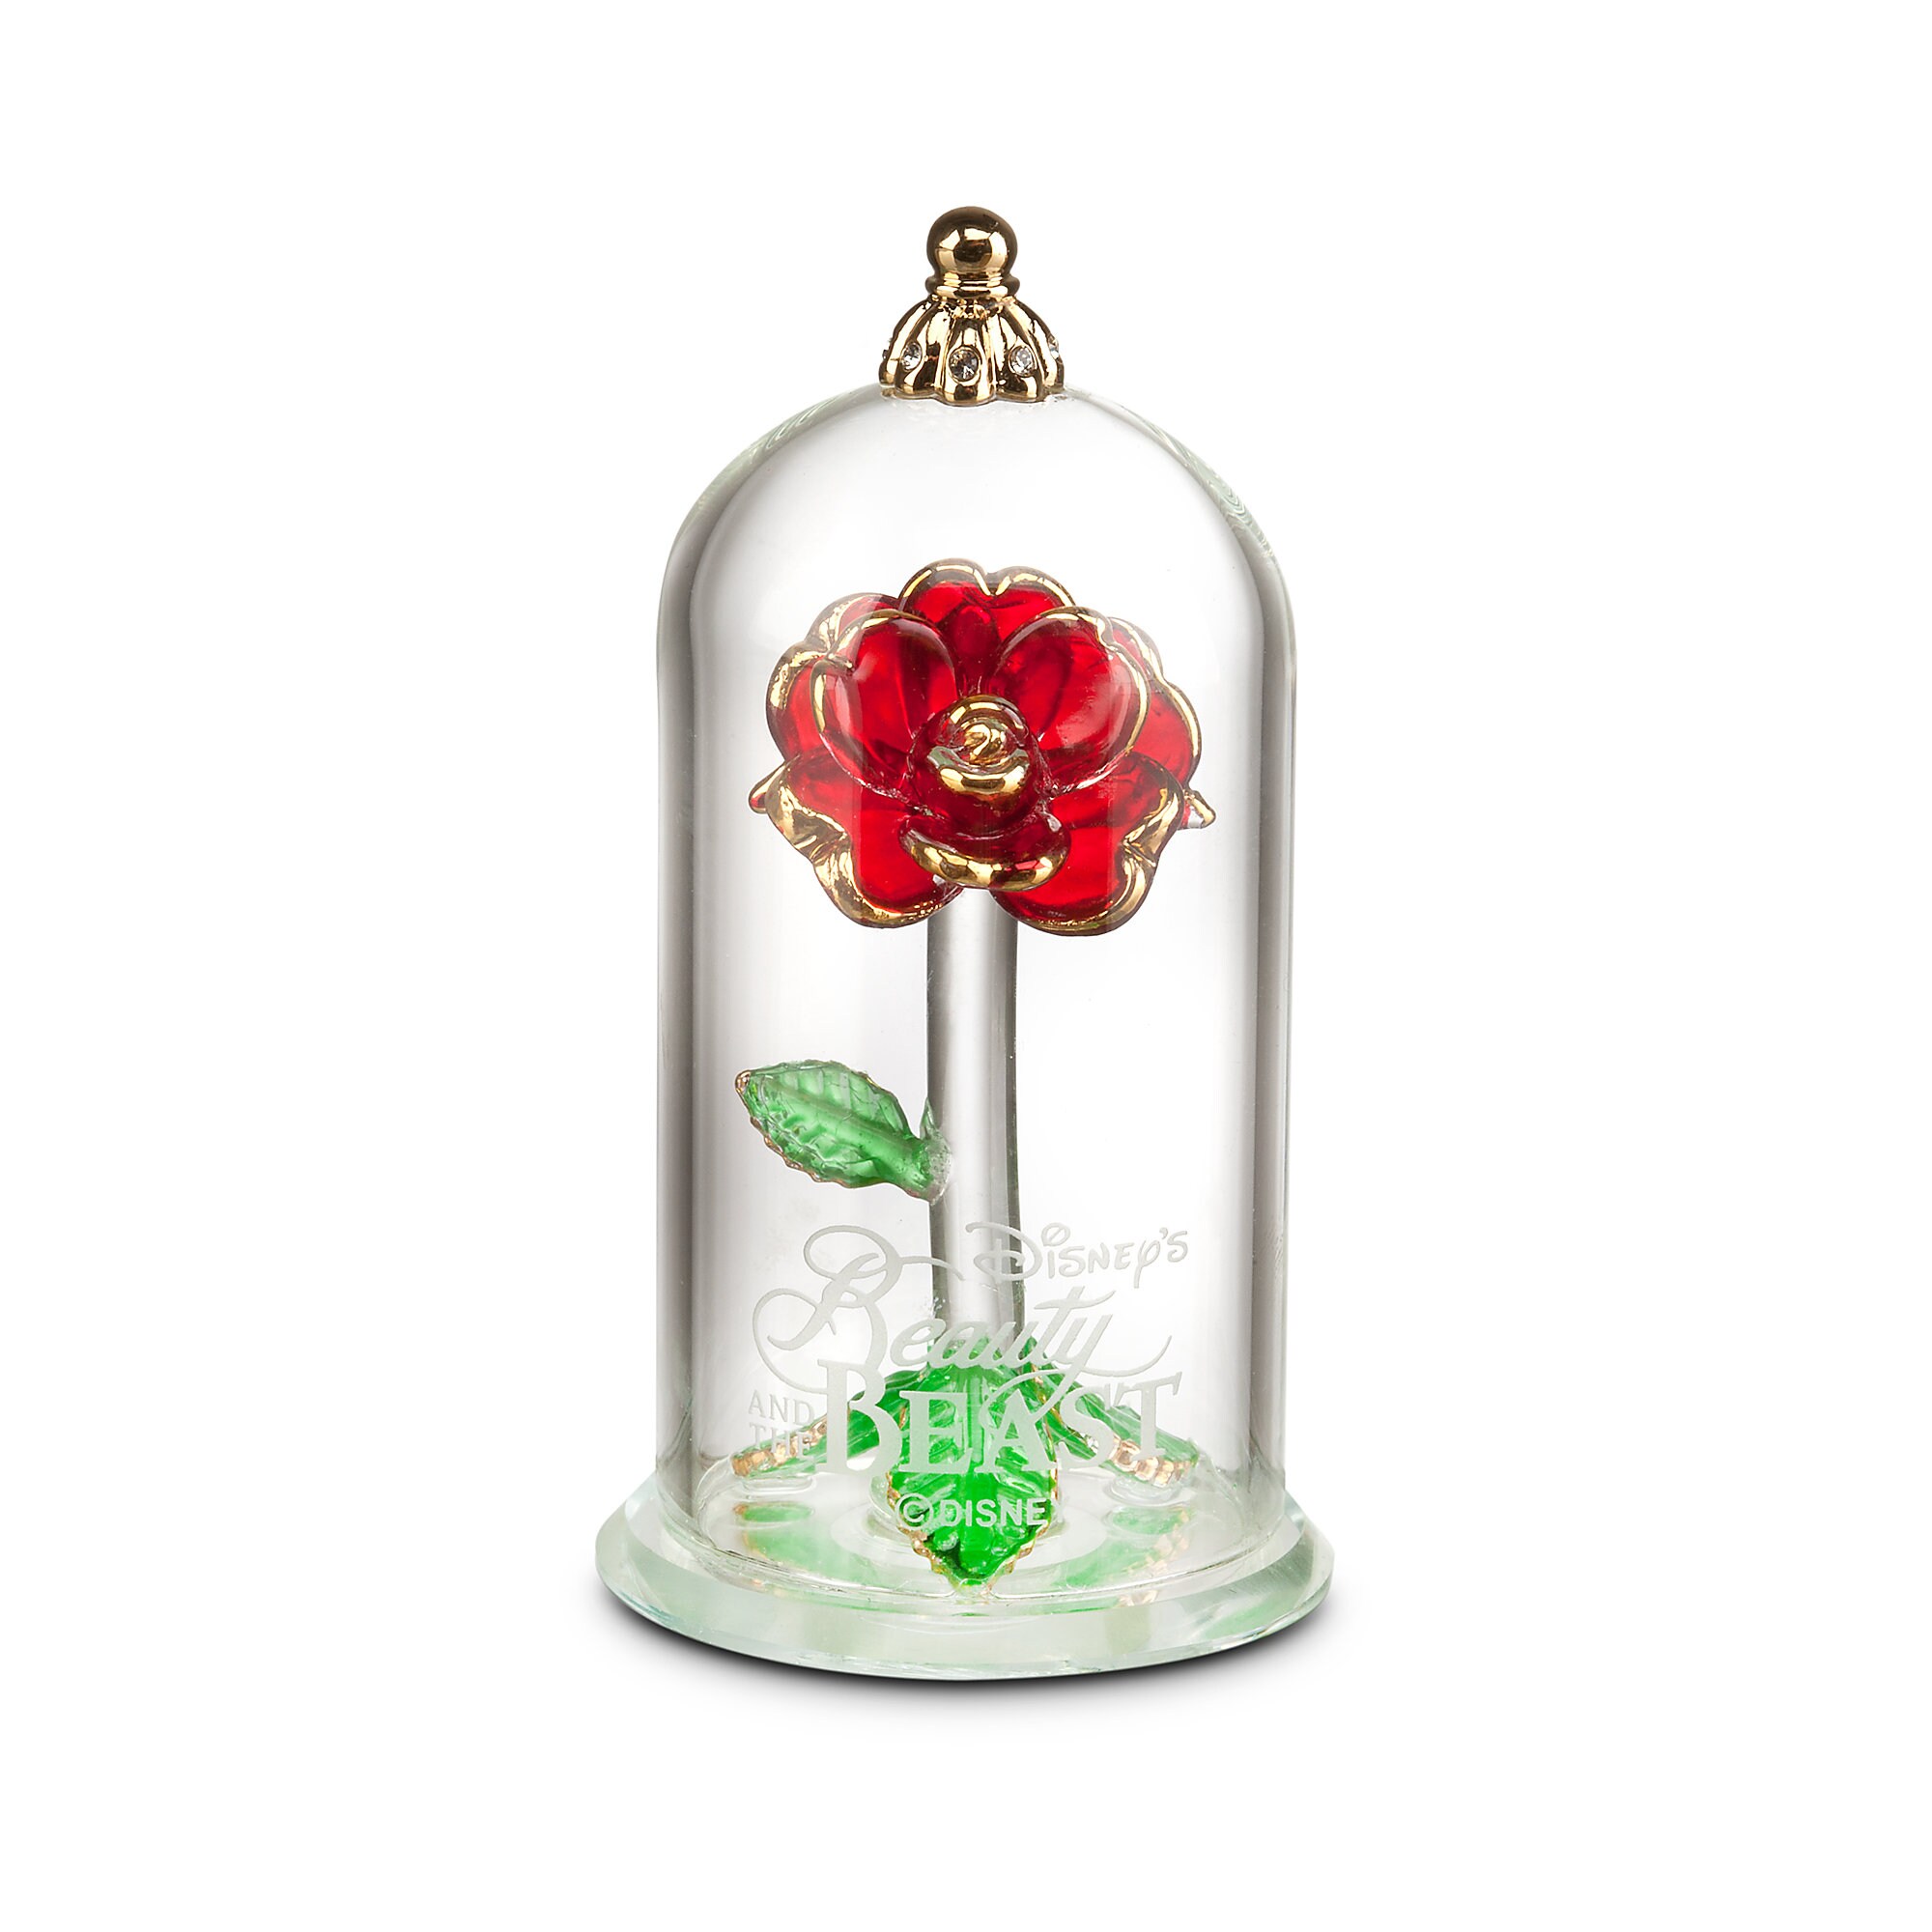 Beauty and the Beast Enchanted Rose Glass Sculpture by Arribas - Small